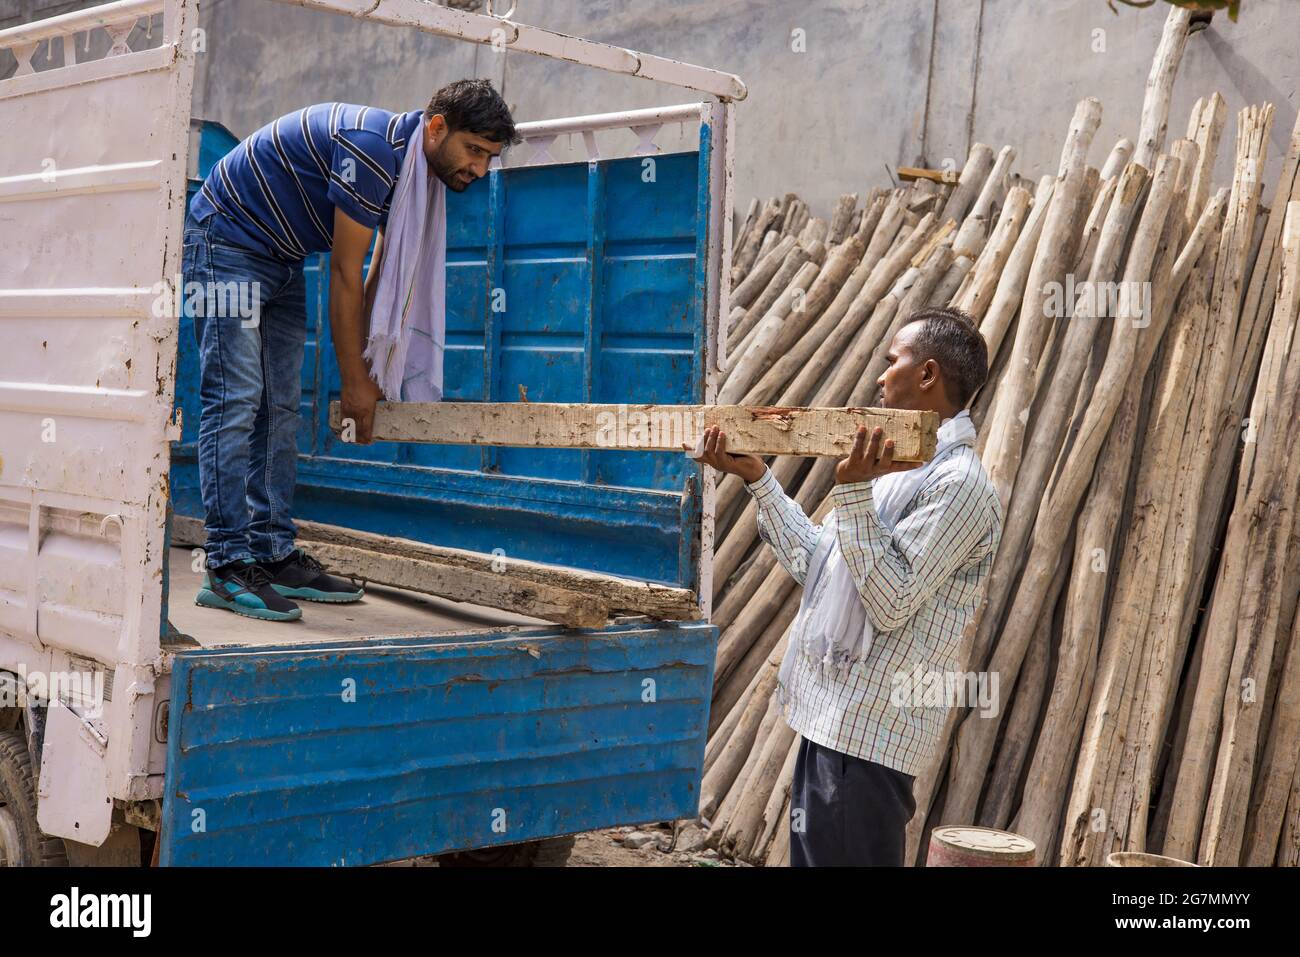 TWO WORKERS UNLOADING A TRUCK WITH WOODEN POLES Stock Photo